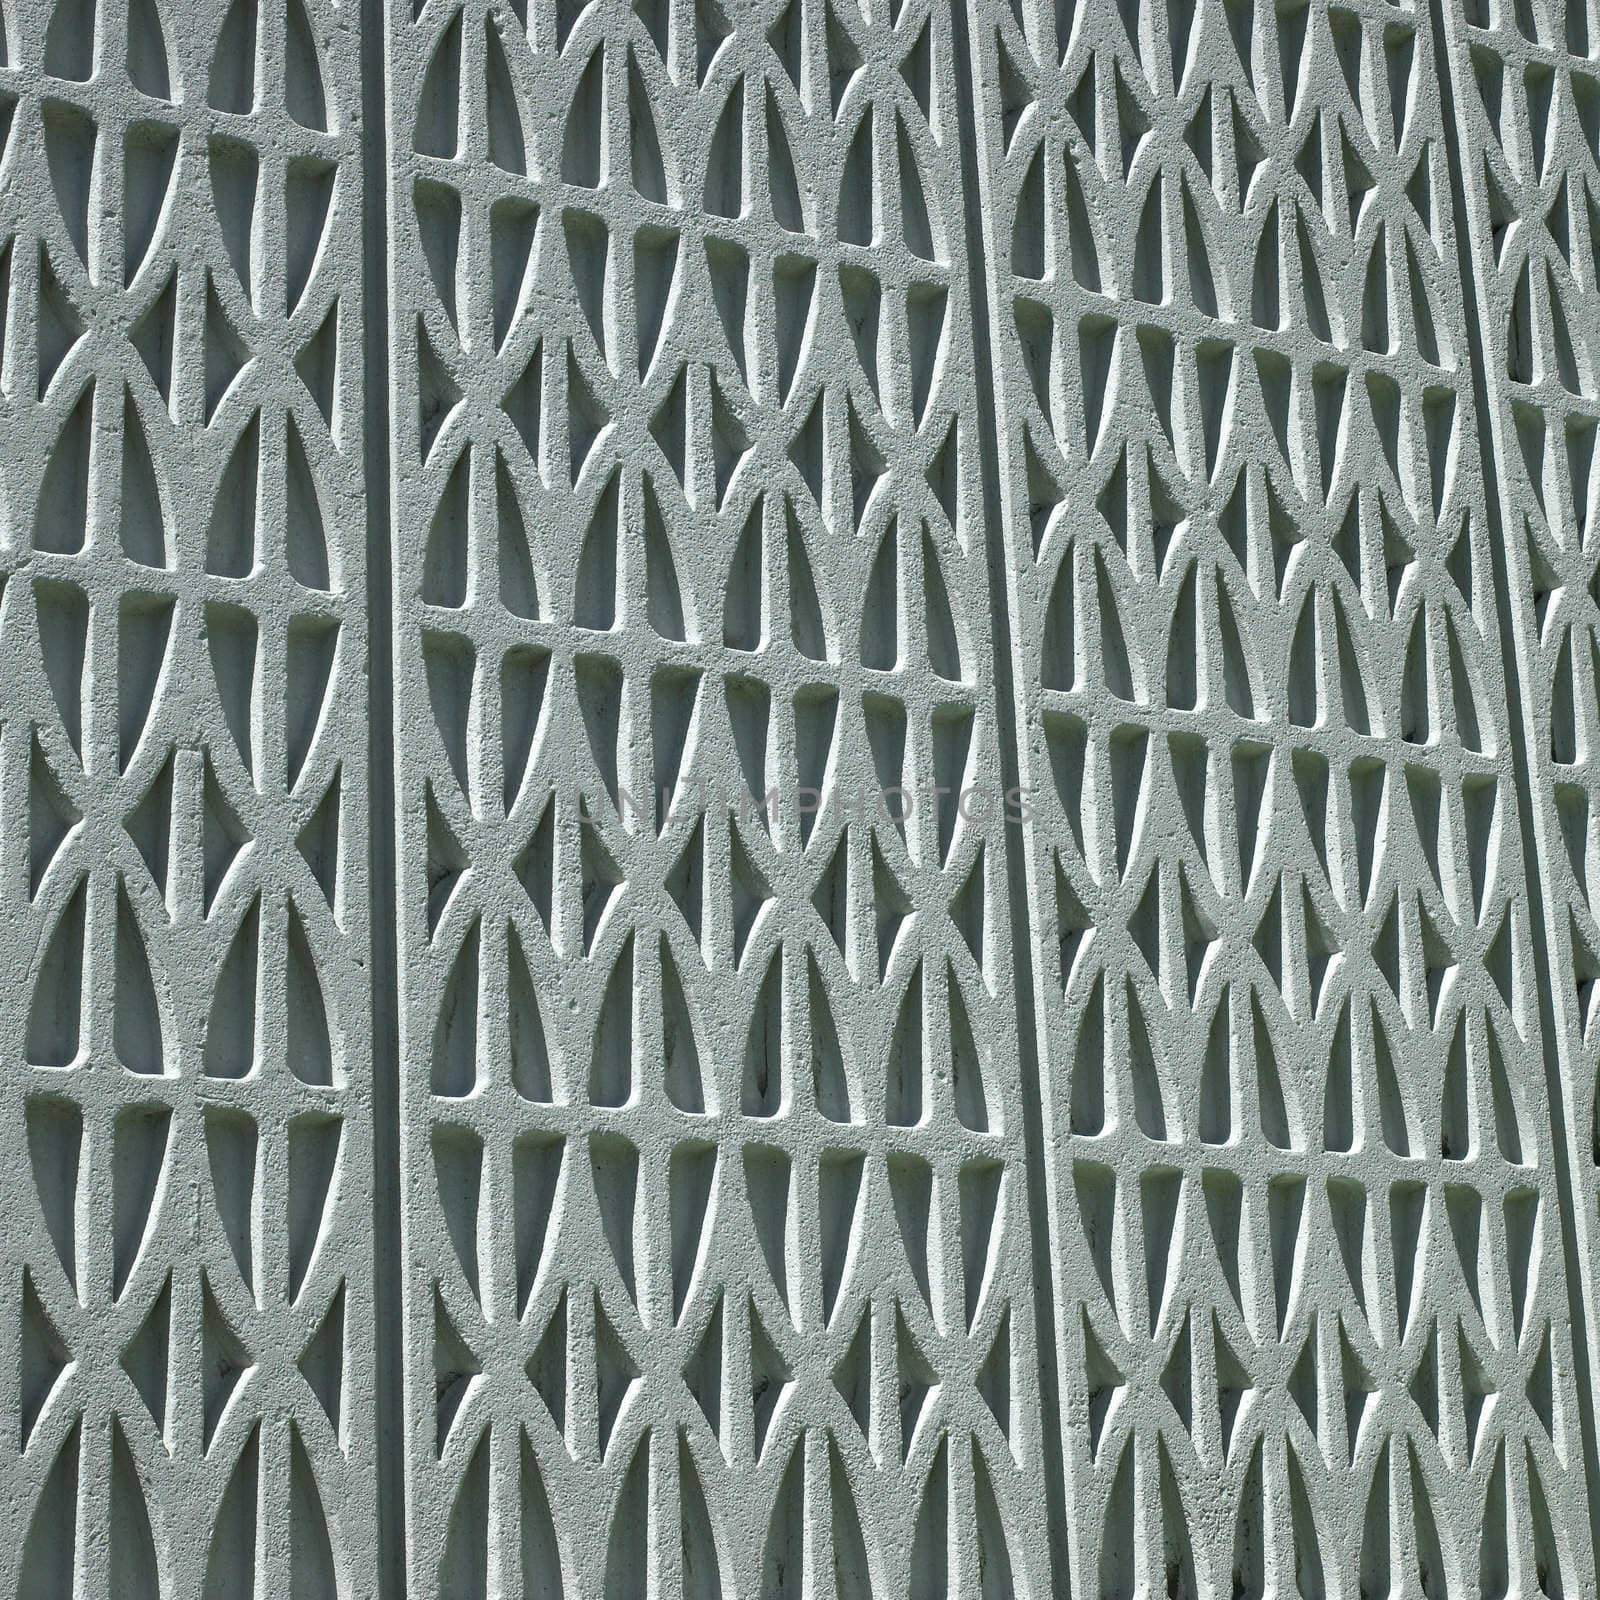 Patterned wall by mmm